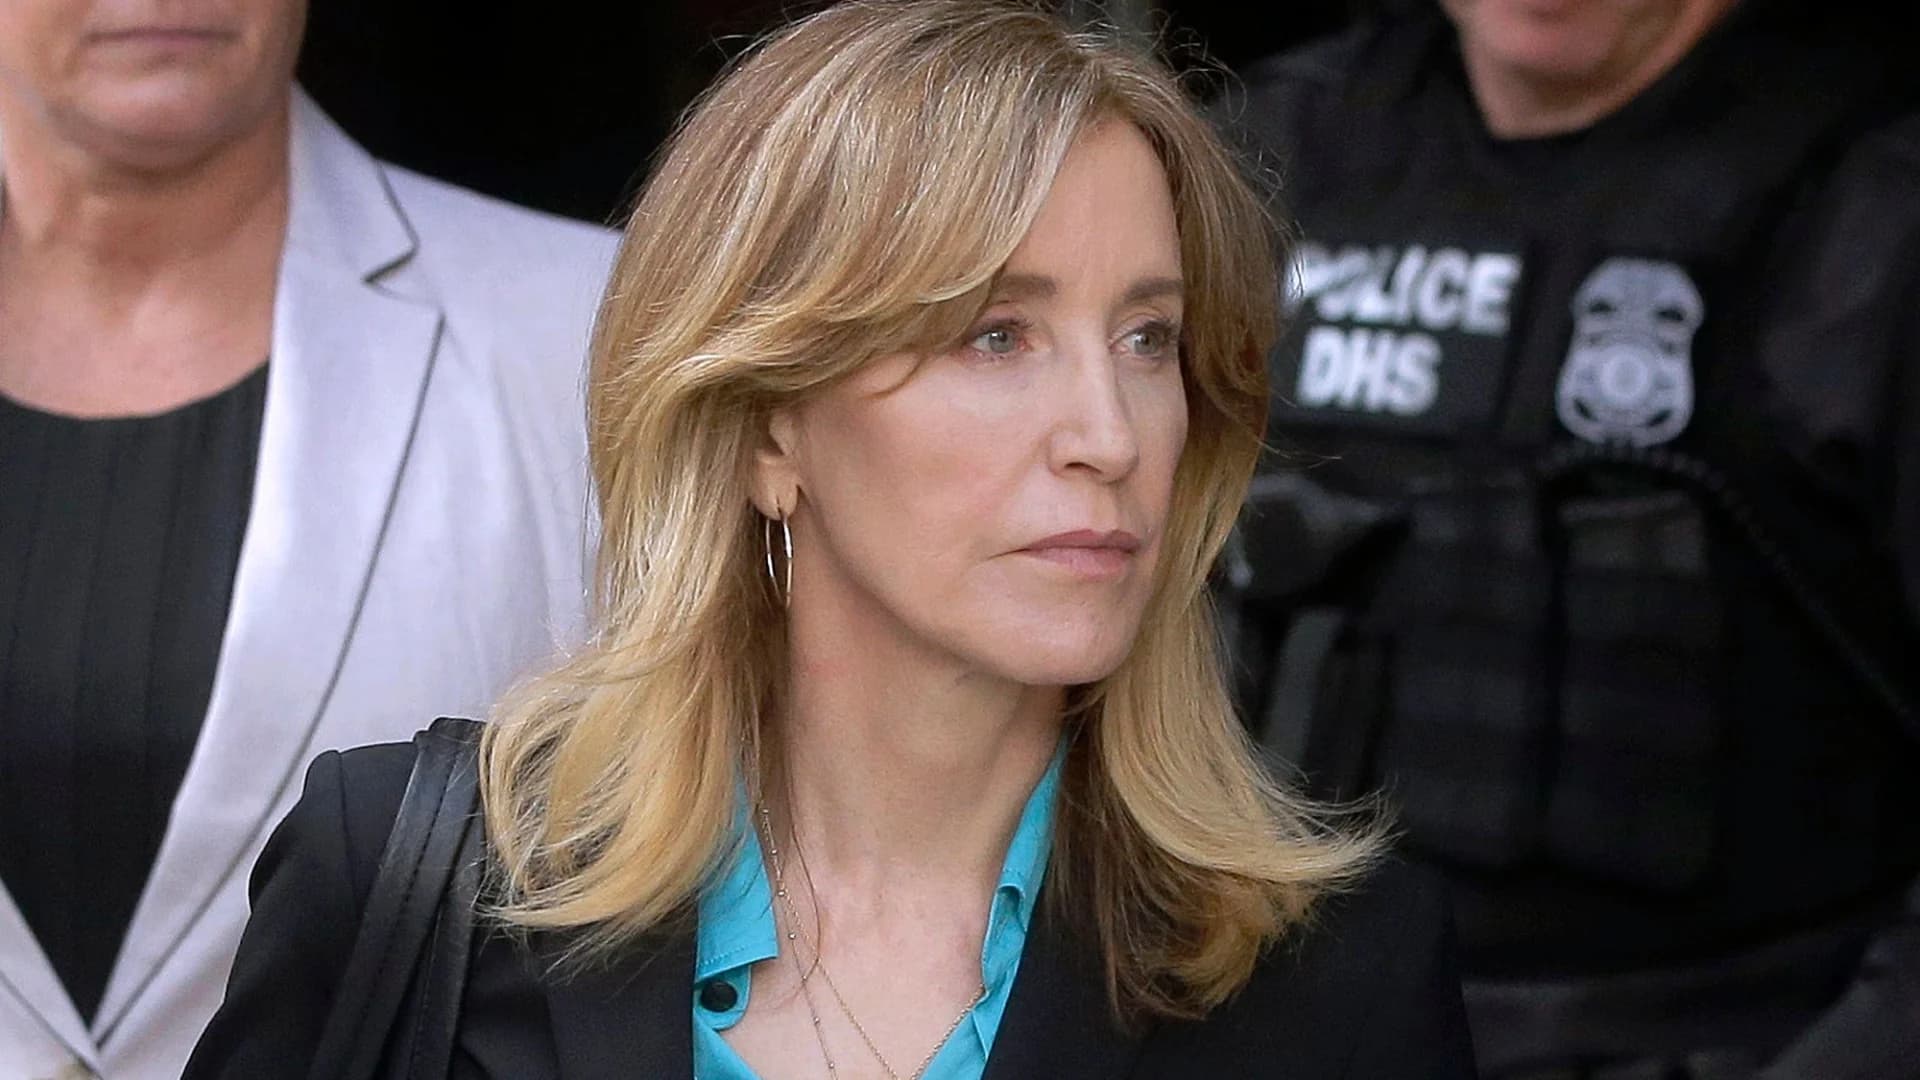 Felicity Huffman, 12 other parents to plead guilty in college scheme